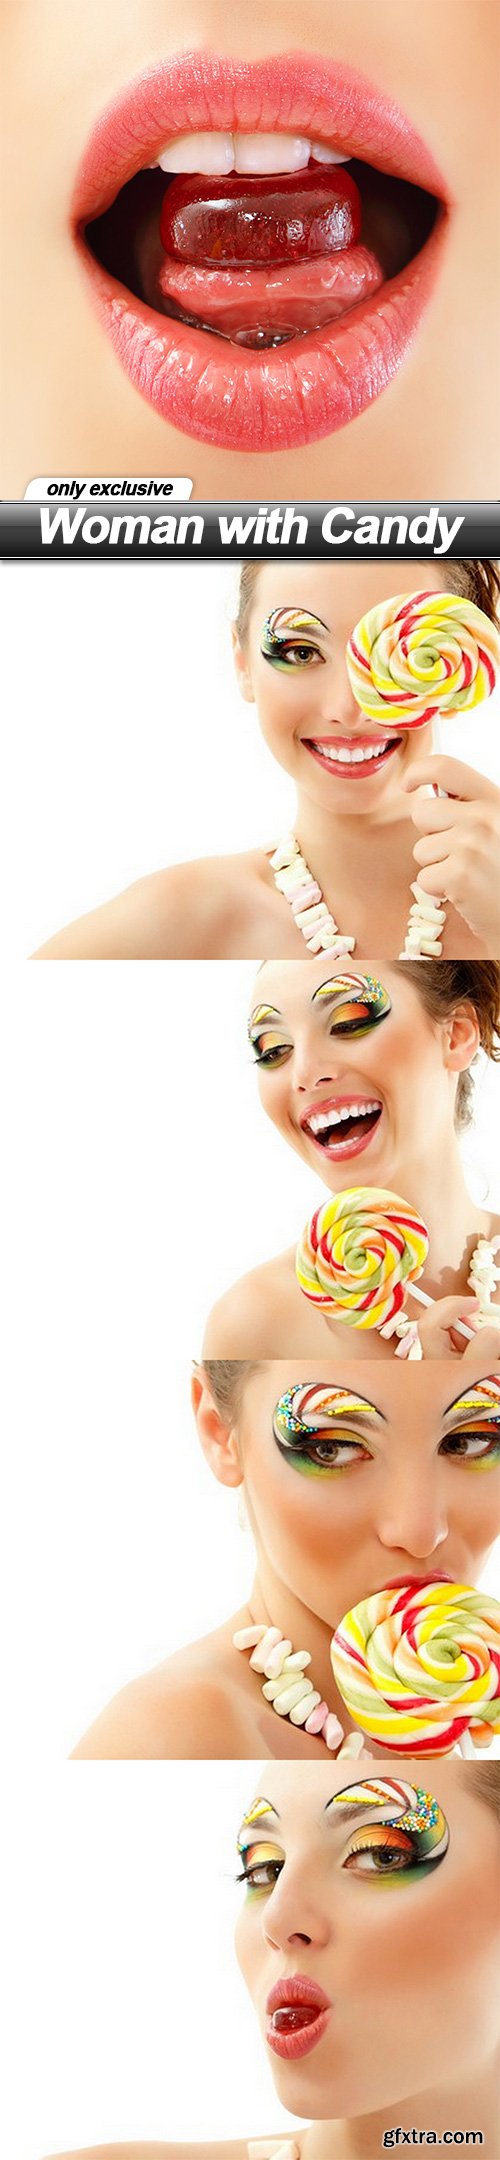 Woman with Candy - 5 UHQ JPEG